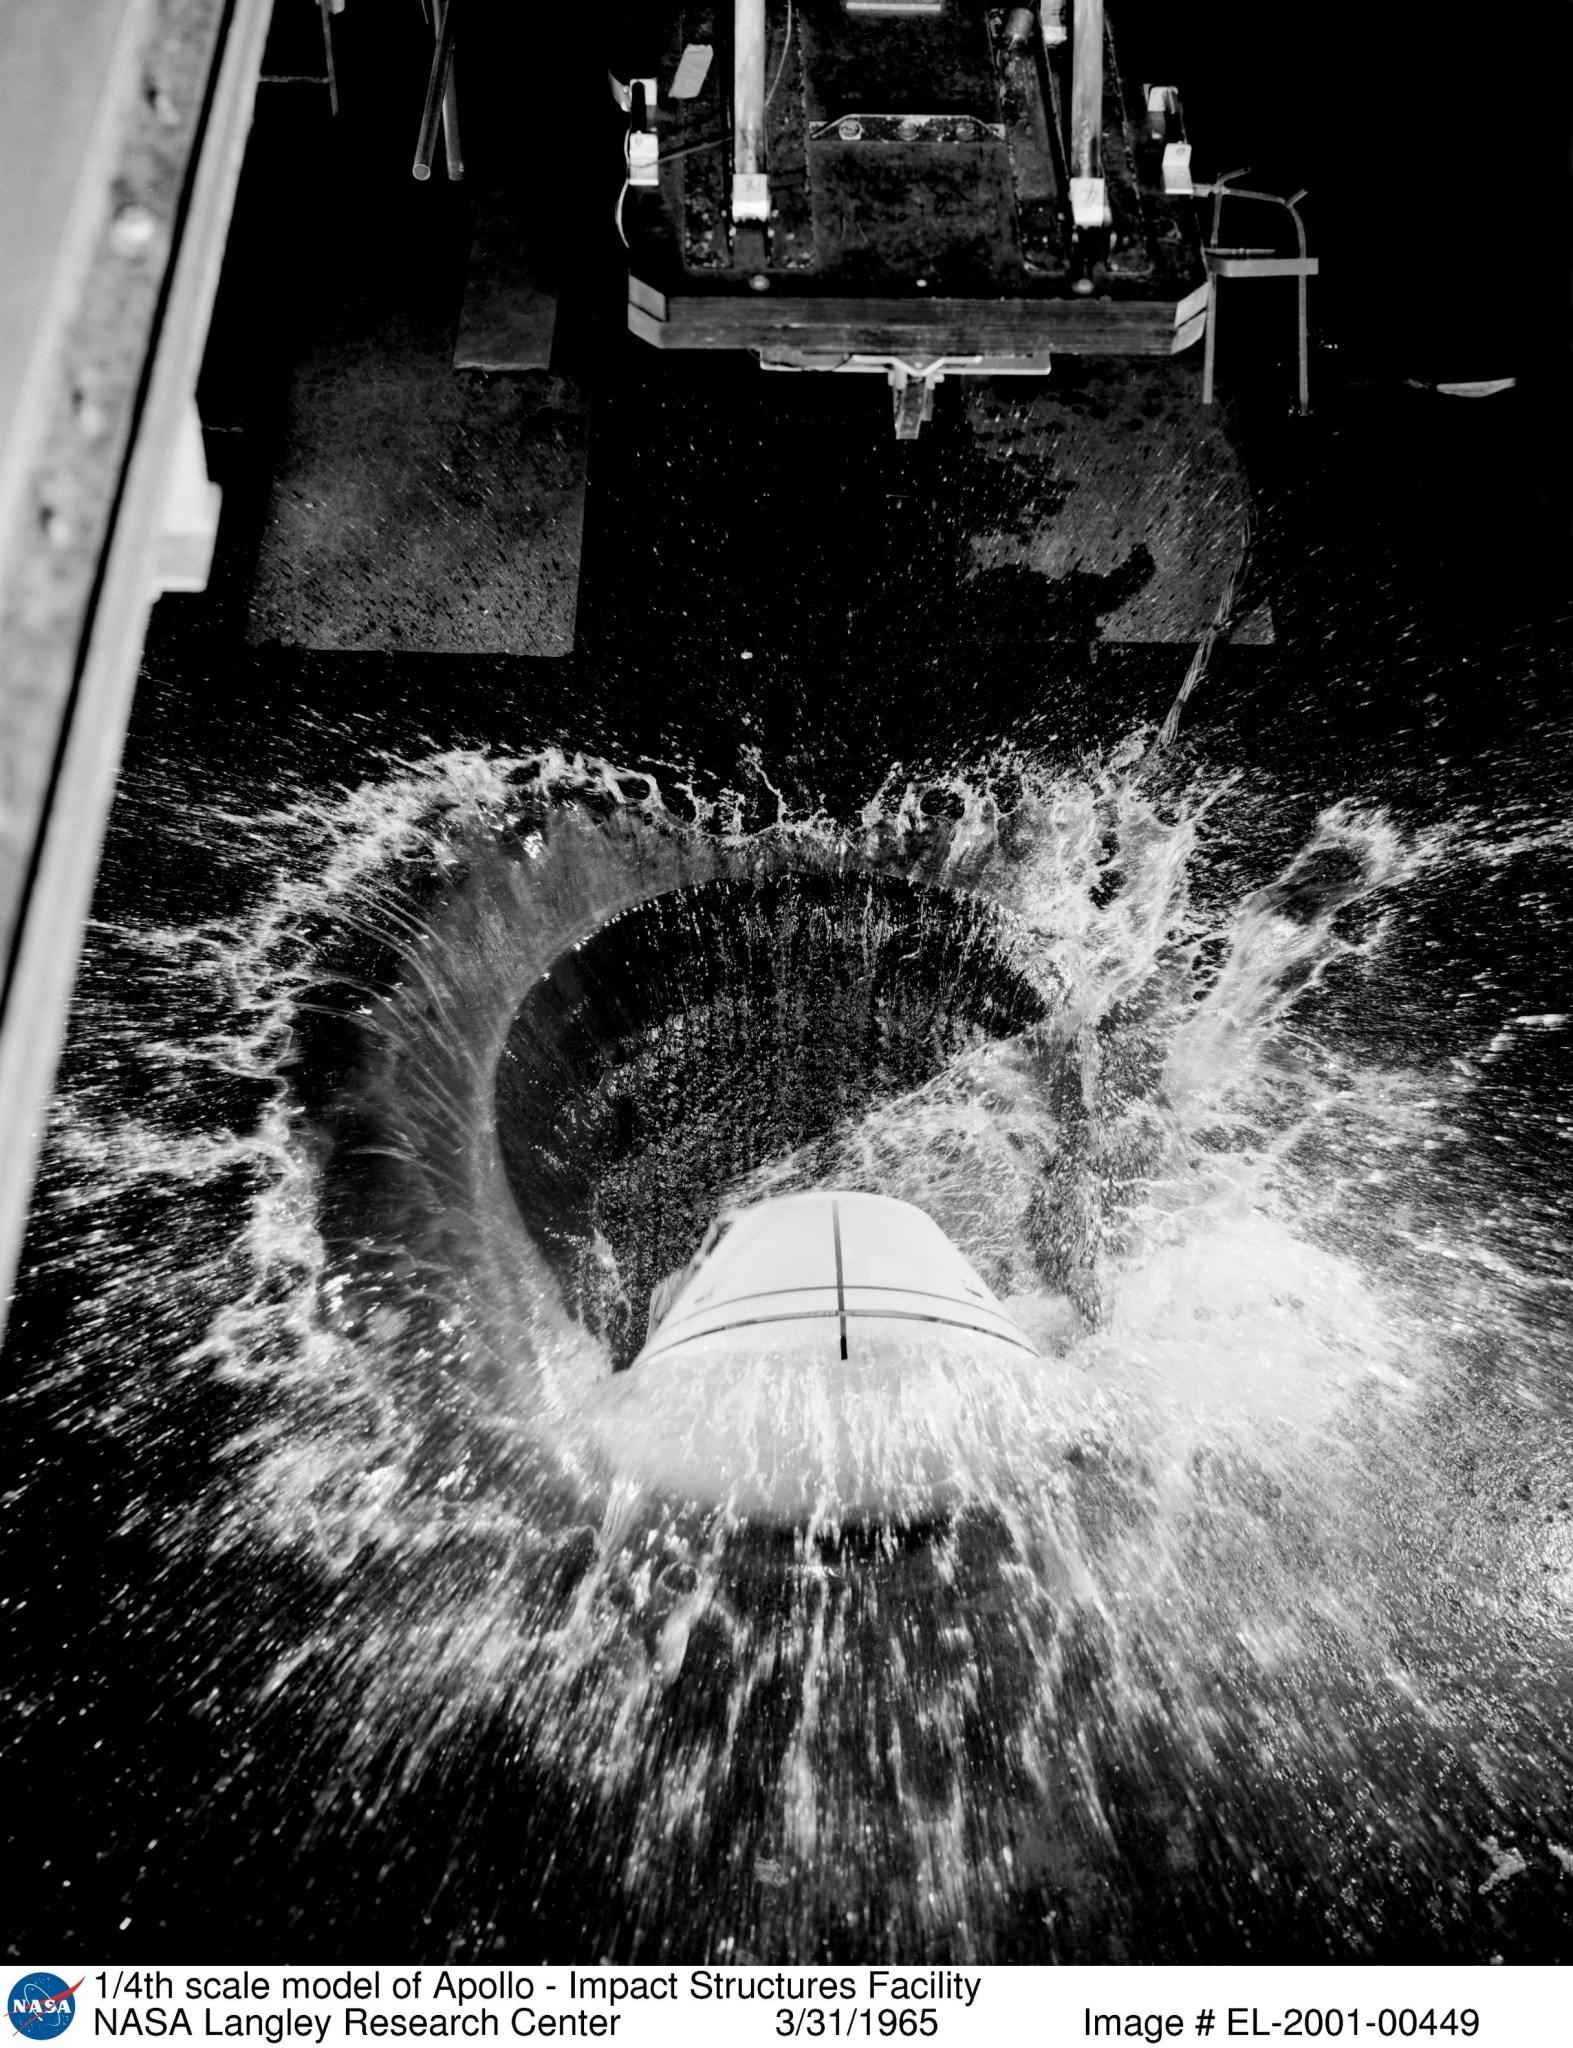 To determine water-landing characteristics of the Apollo capsule, a ¼ scale model, seen here during testing in in the Impacts Facility in 1965, was dropped from an overhead pendulum device.